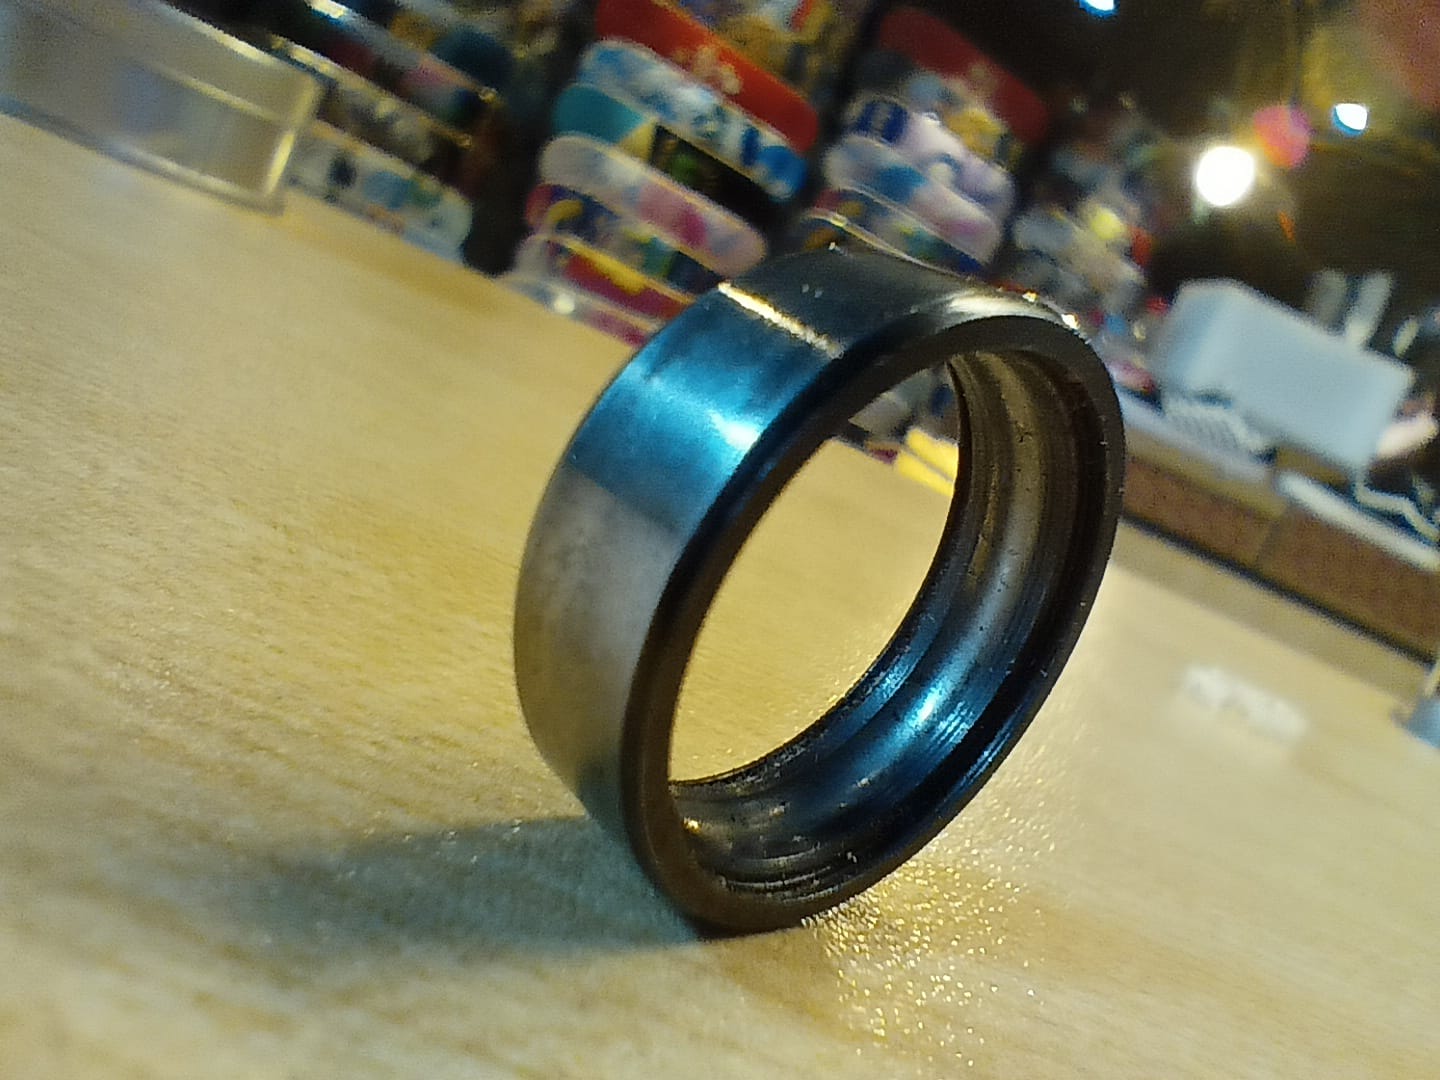 The Swiss skateboard bearings have a removable shield.